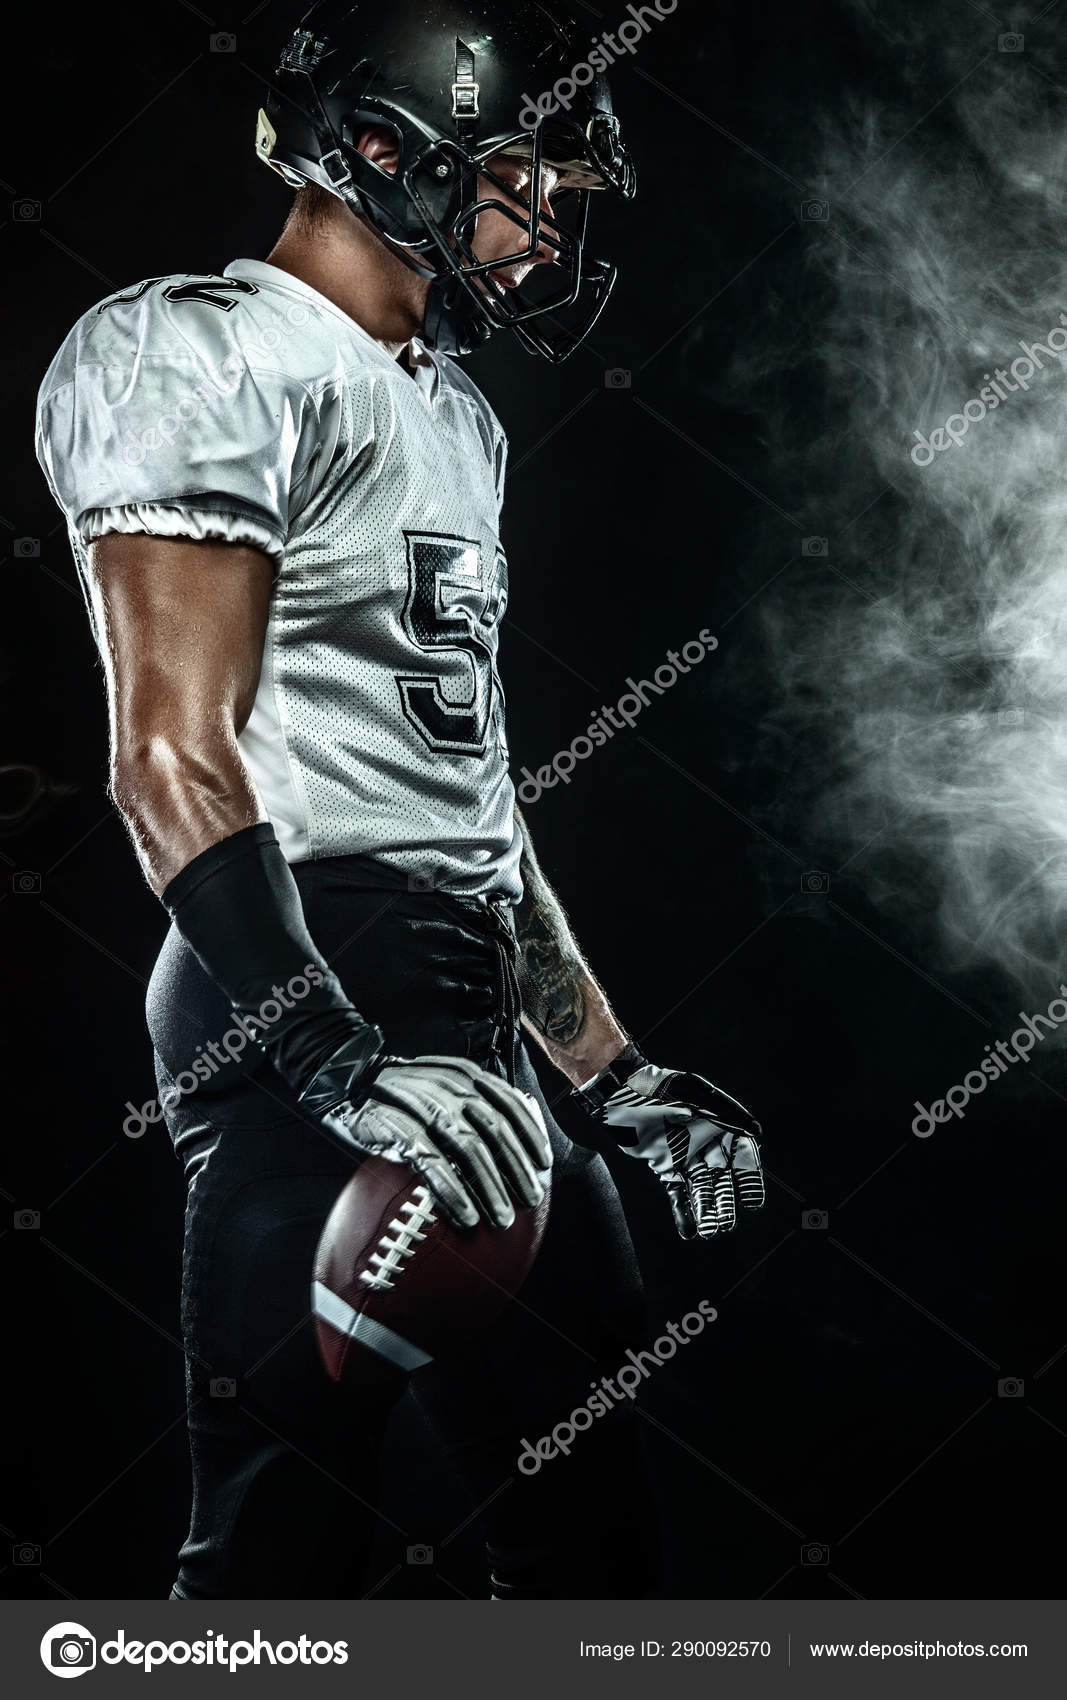 American Football Sportsman Player In Helmet On Black Background With Smoke Sport And Motivation Wallpaper Stock Photo C Mikeorlov